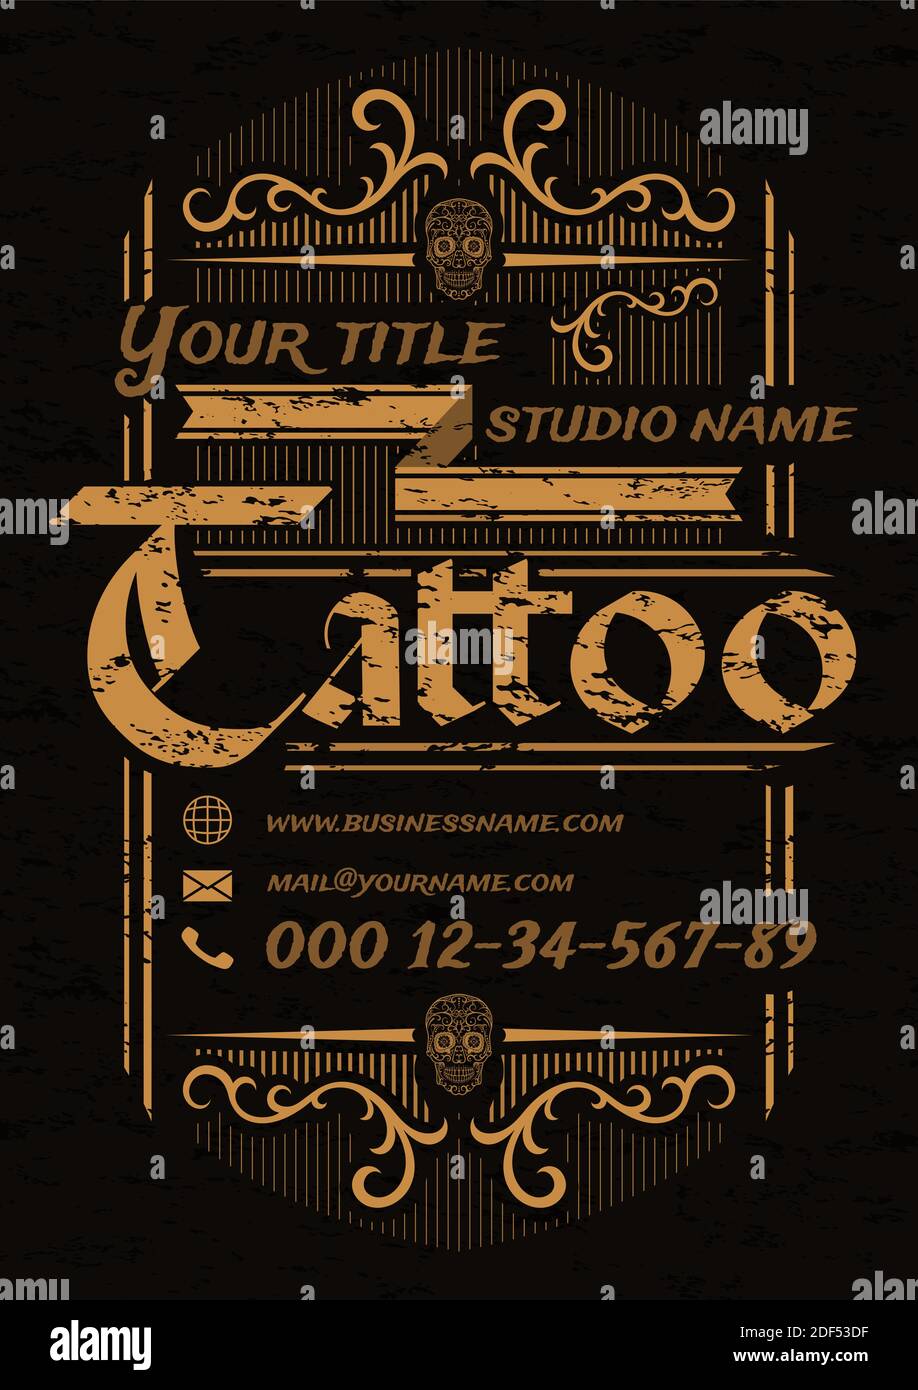 Free Creative Tattoo Poster Background Images Creative Tattoo Poster  Background Photo Background PNG and Vectors  Tattoo posters Creative  tattoos Beauty posters